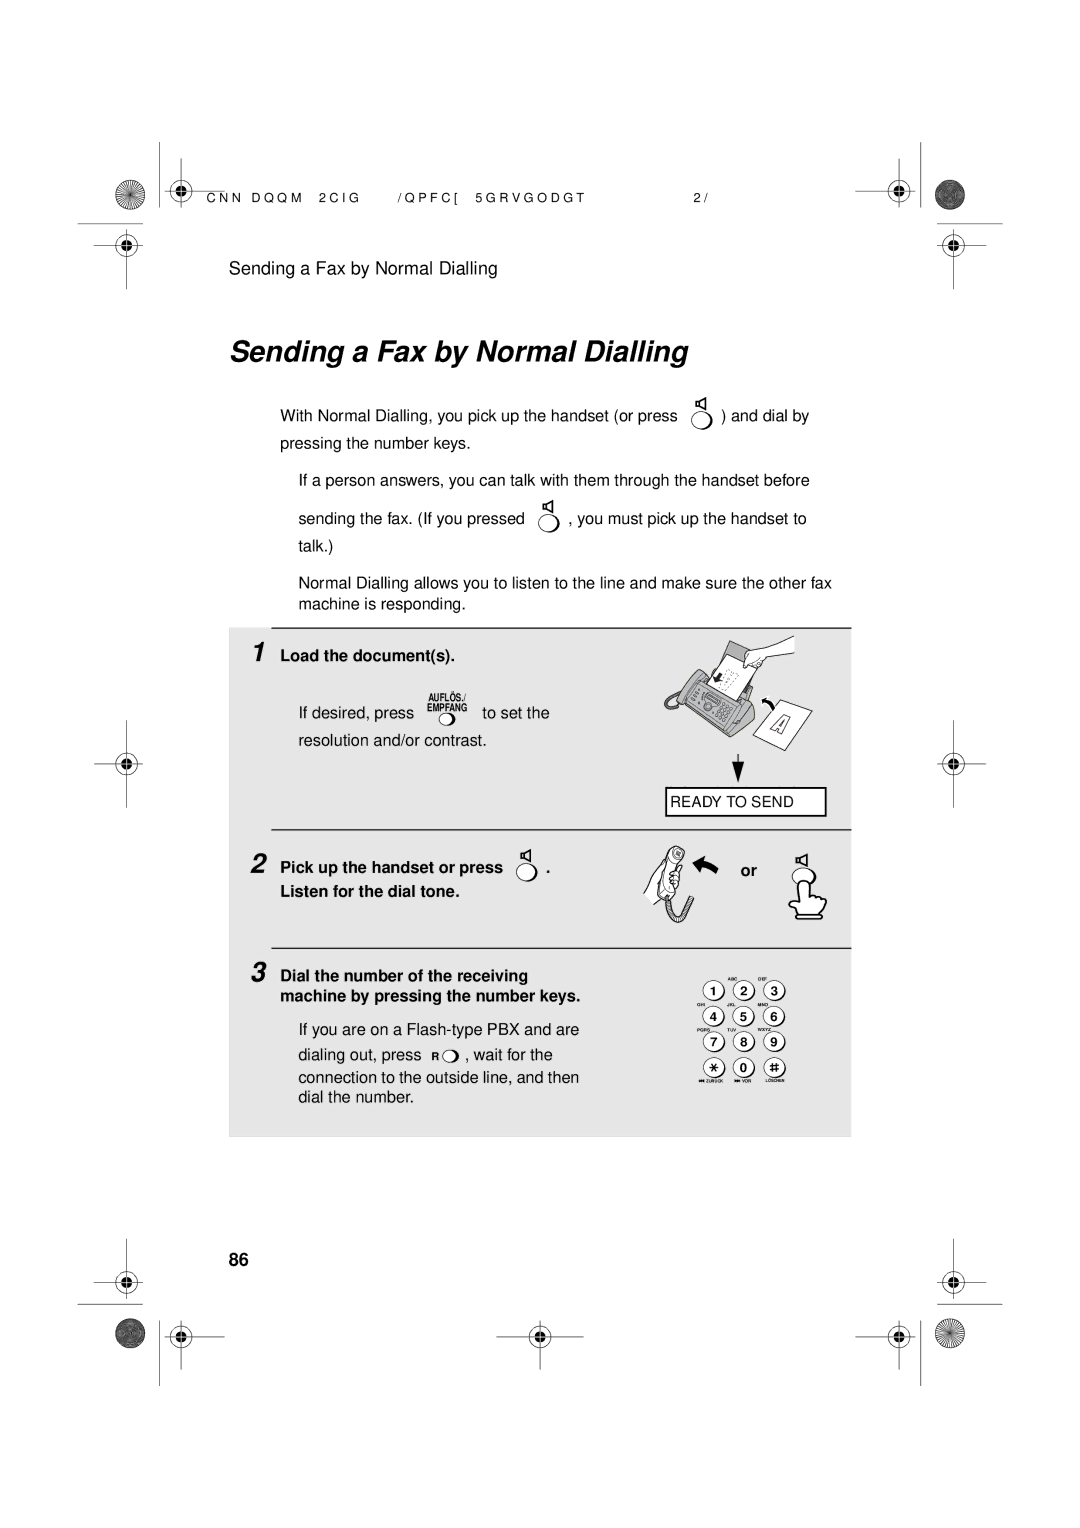 Sharp UX-D50 manual Sending a Fax by Normal Dialling 